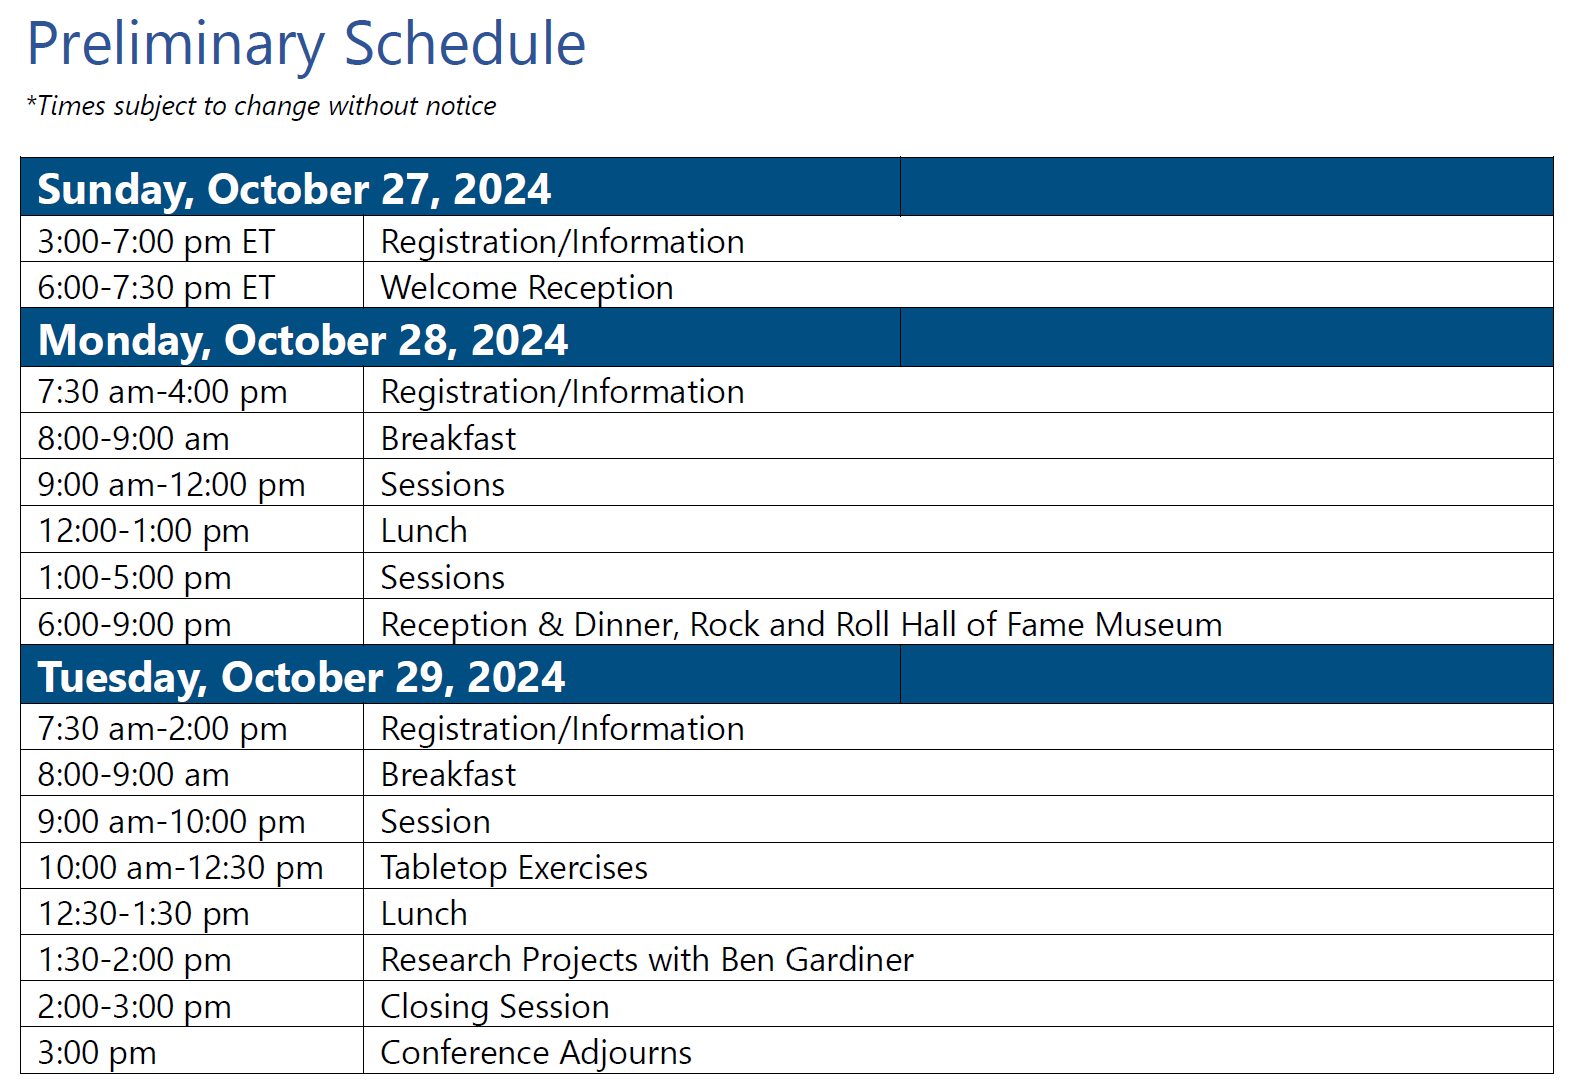 NMFTA Cyber Conference Preliminary Schedule 2024